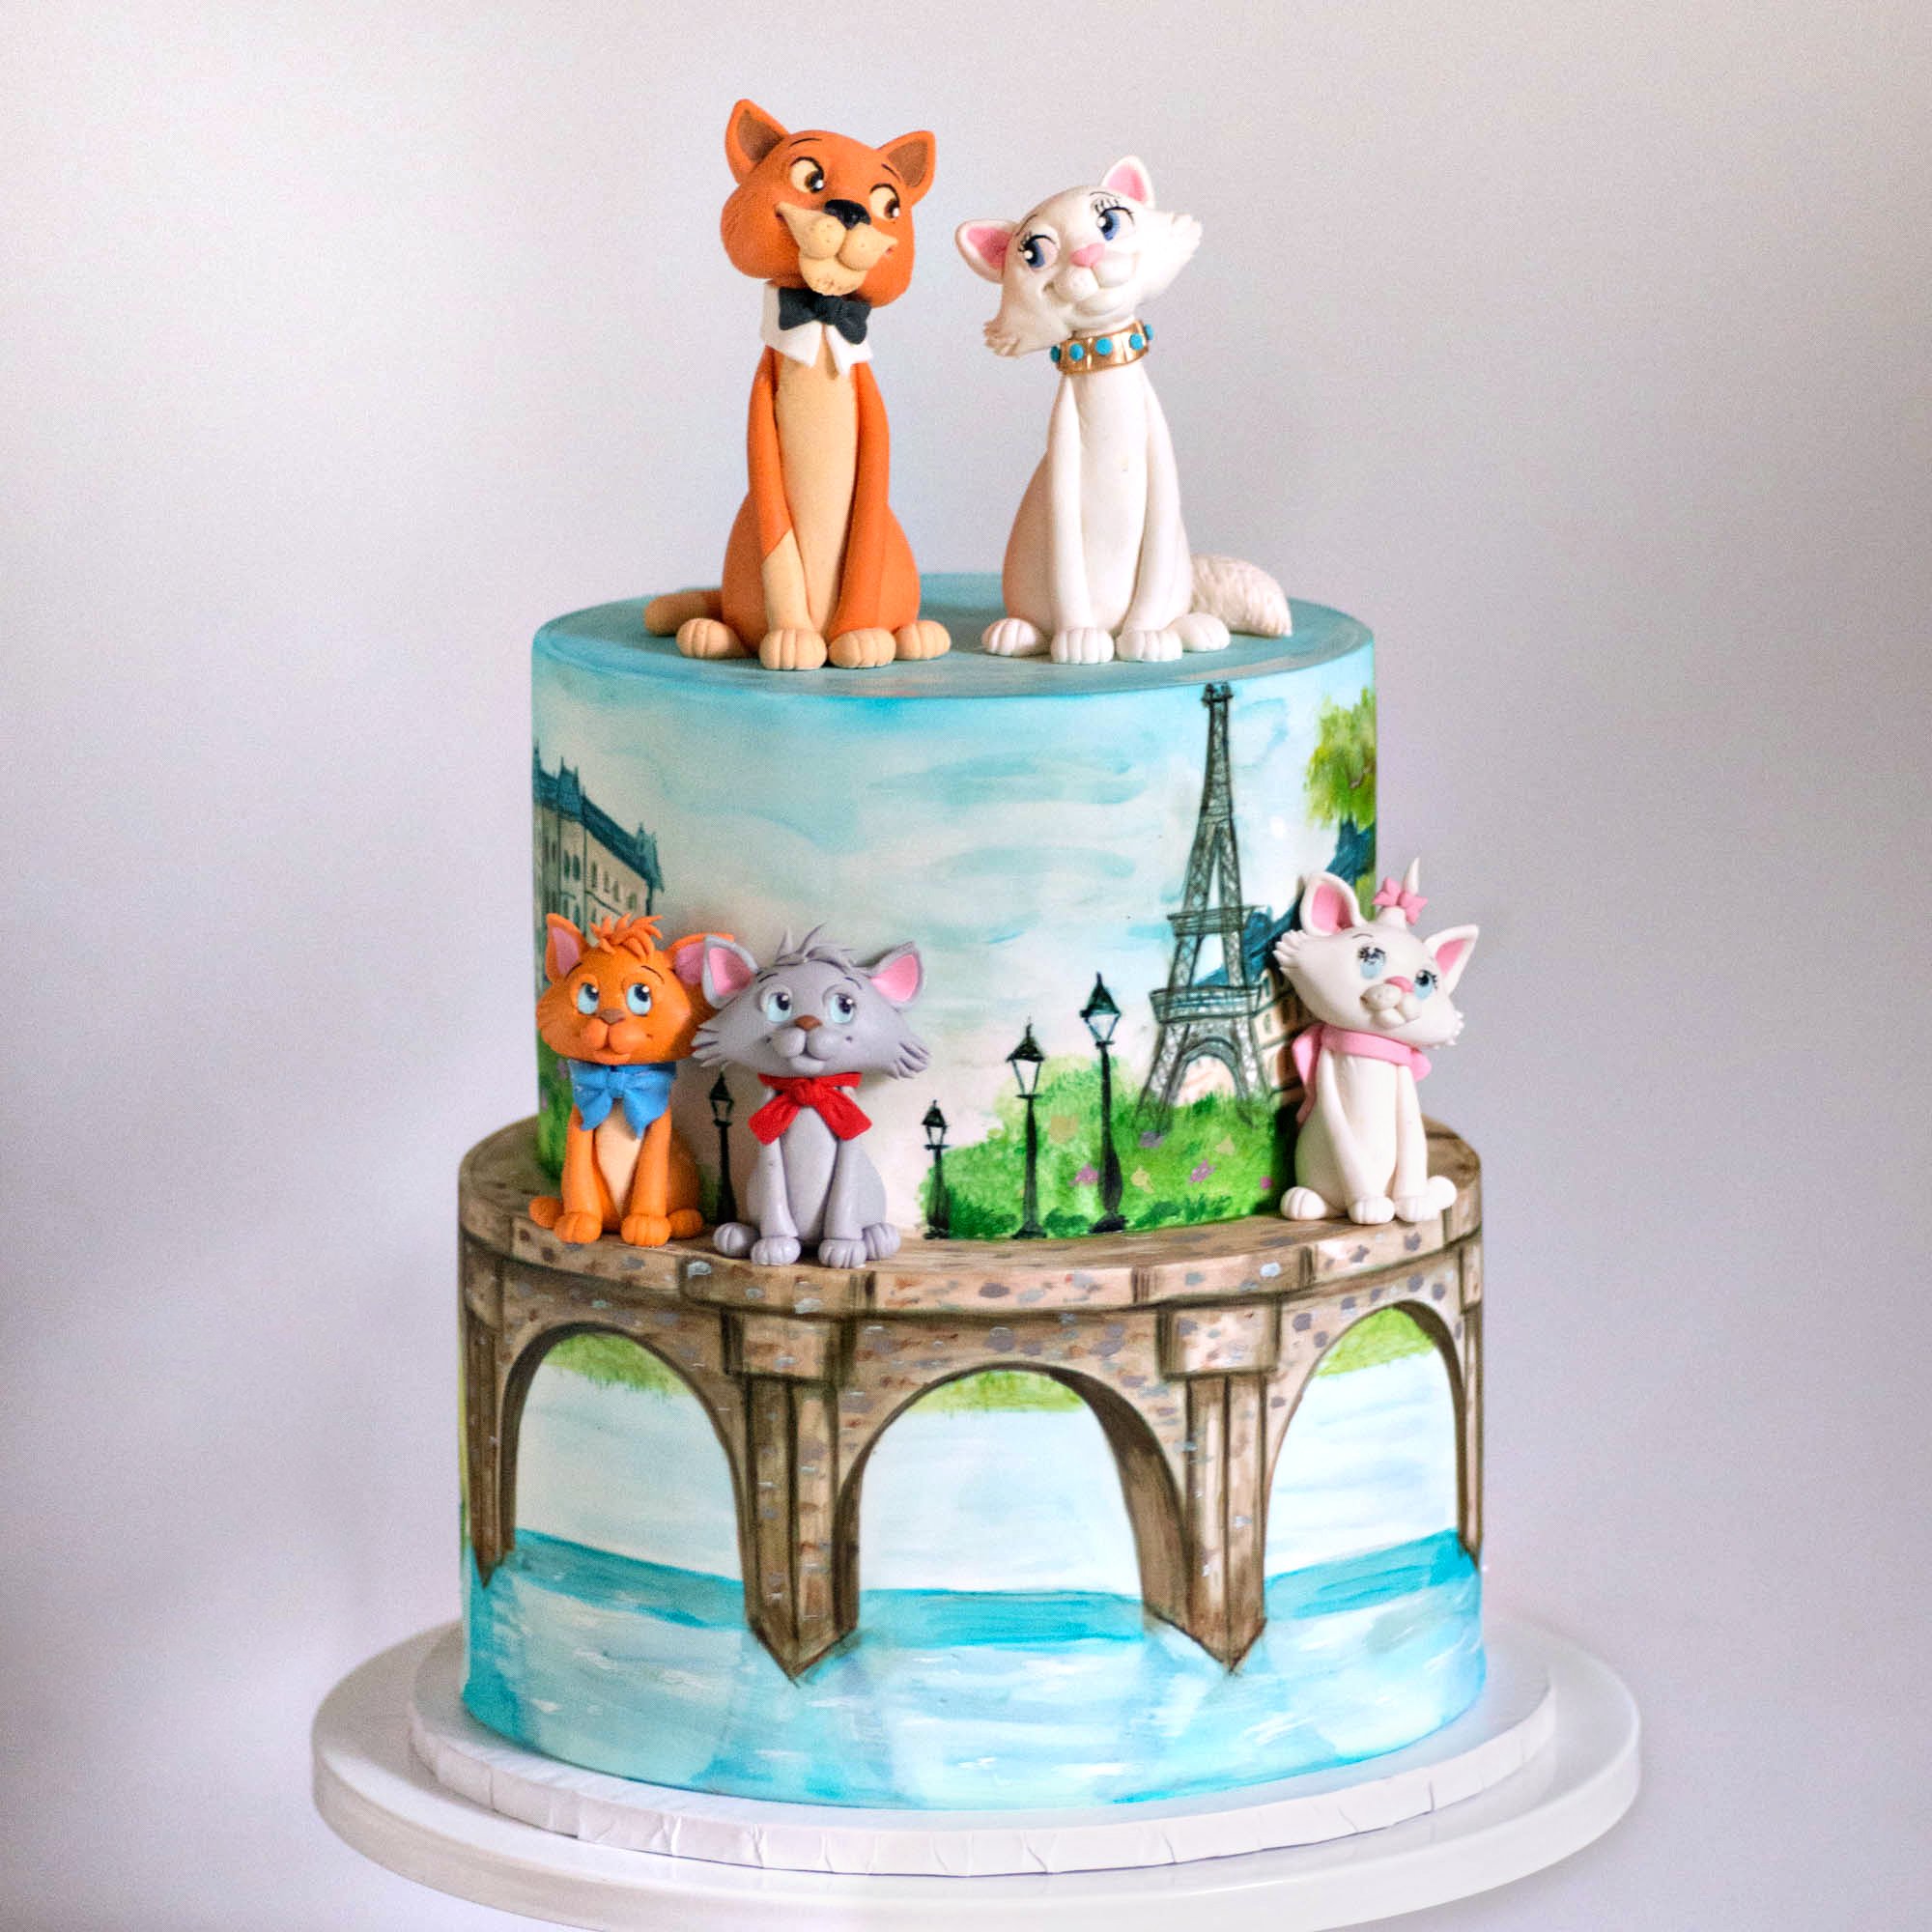 Children's Birthday Cake 25 - Lou's Cakes and Speciality Bakes-sgquangbinhtourist.com.vn